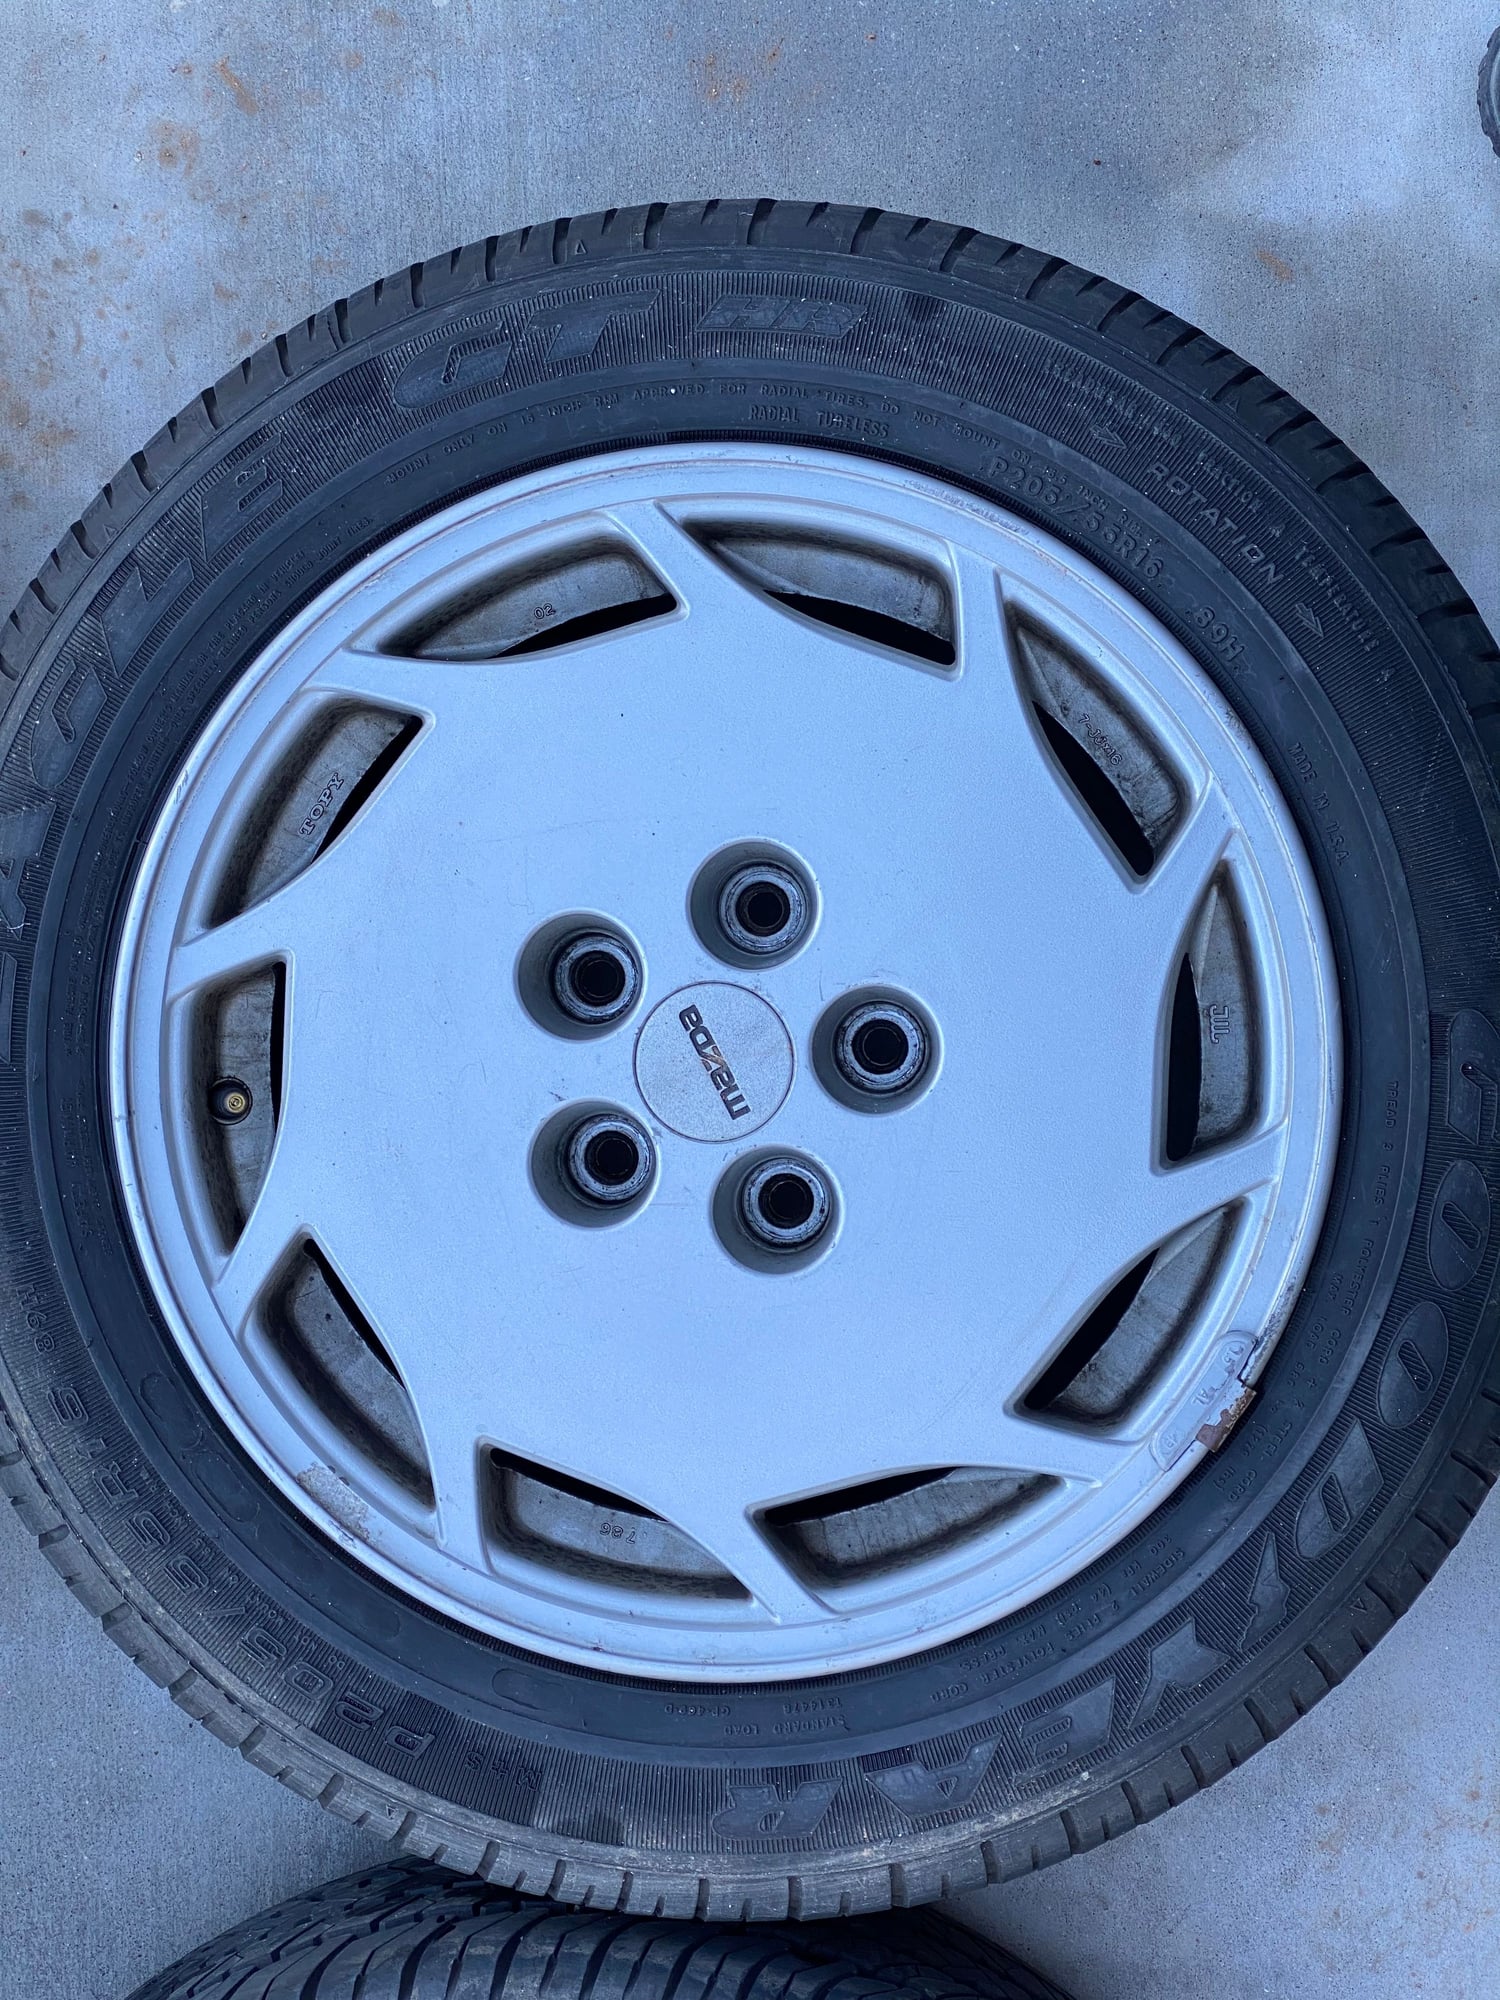 Wheels and Tires/Axles - OEM RX7 Sawblade Wheels and Goodyear Tires - Used - 1986 to 1989 Mazda RX-7 - Maricopa, AZ 85138, United States